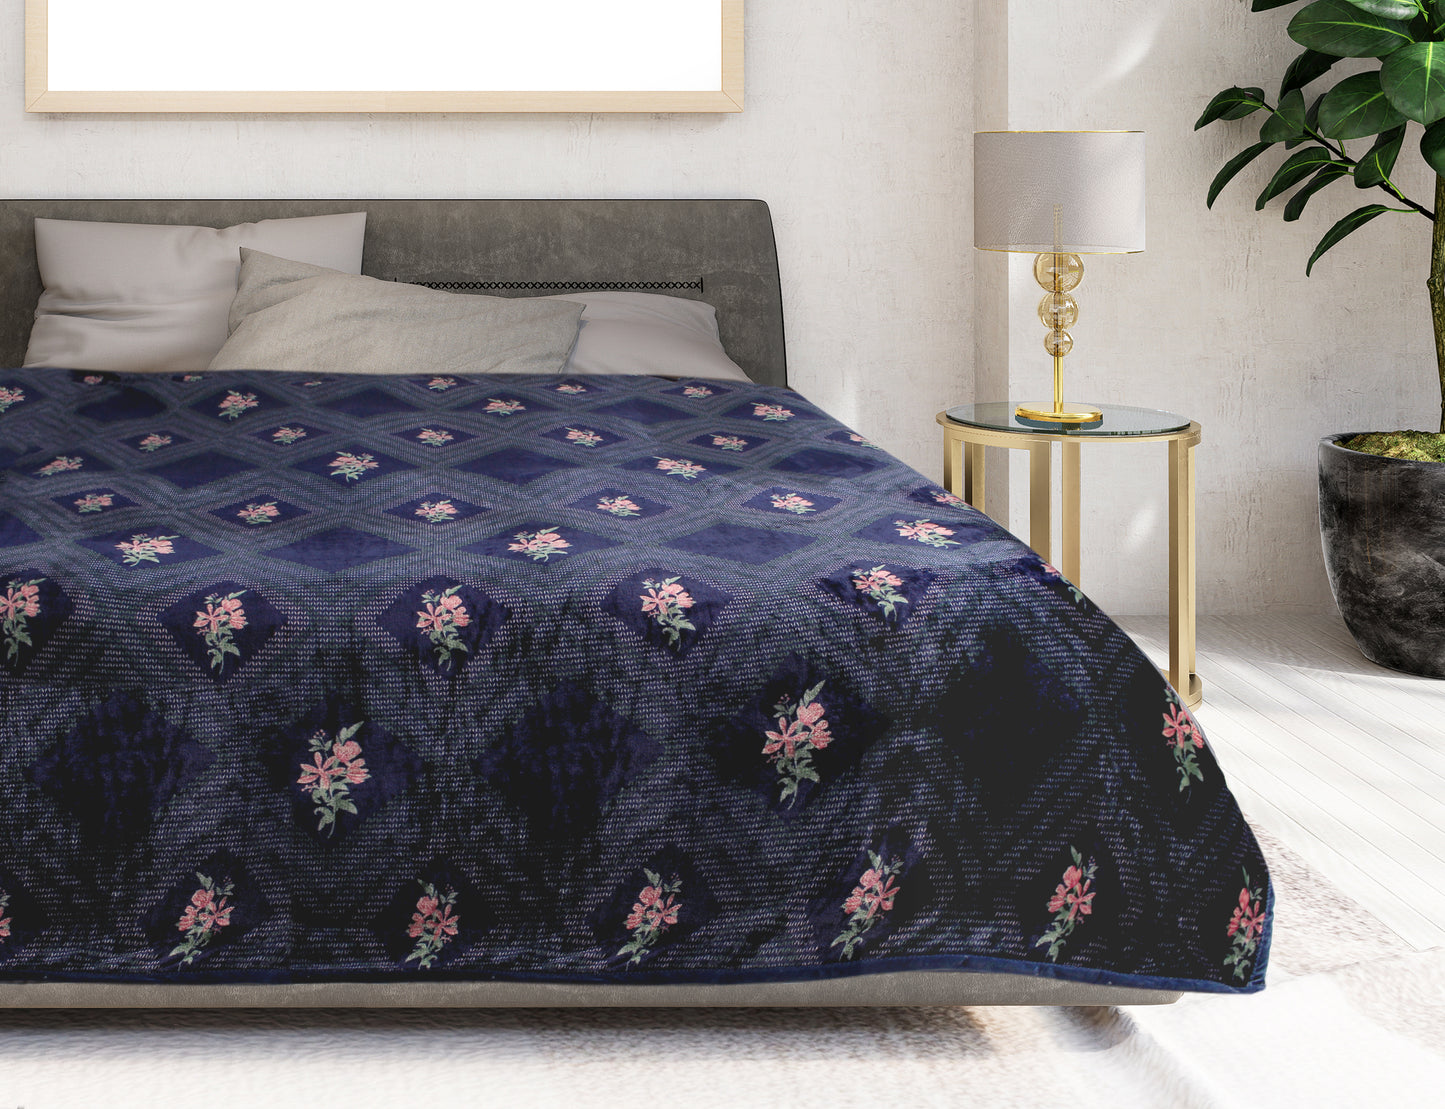 Orchid Winter Bedsheets Collection By Ross